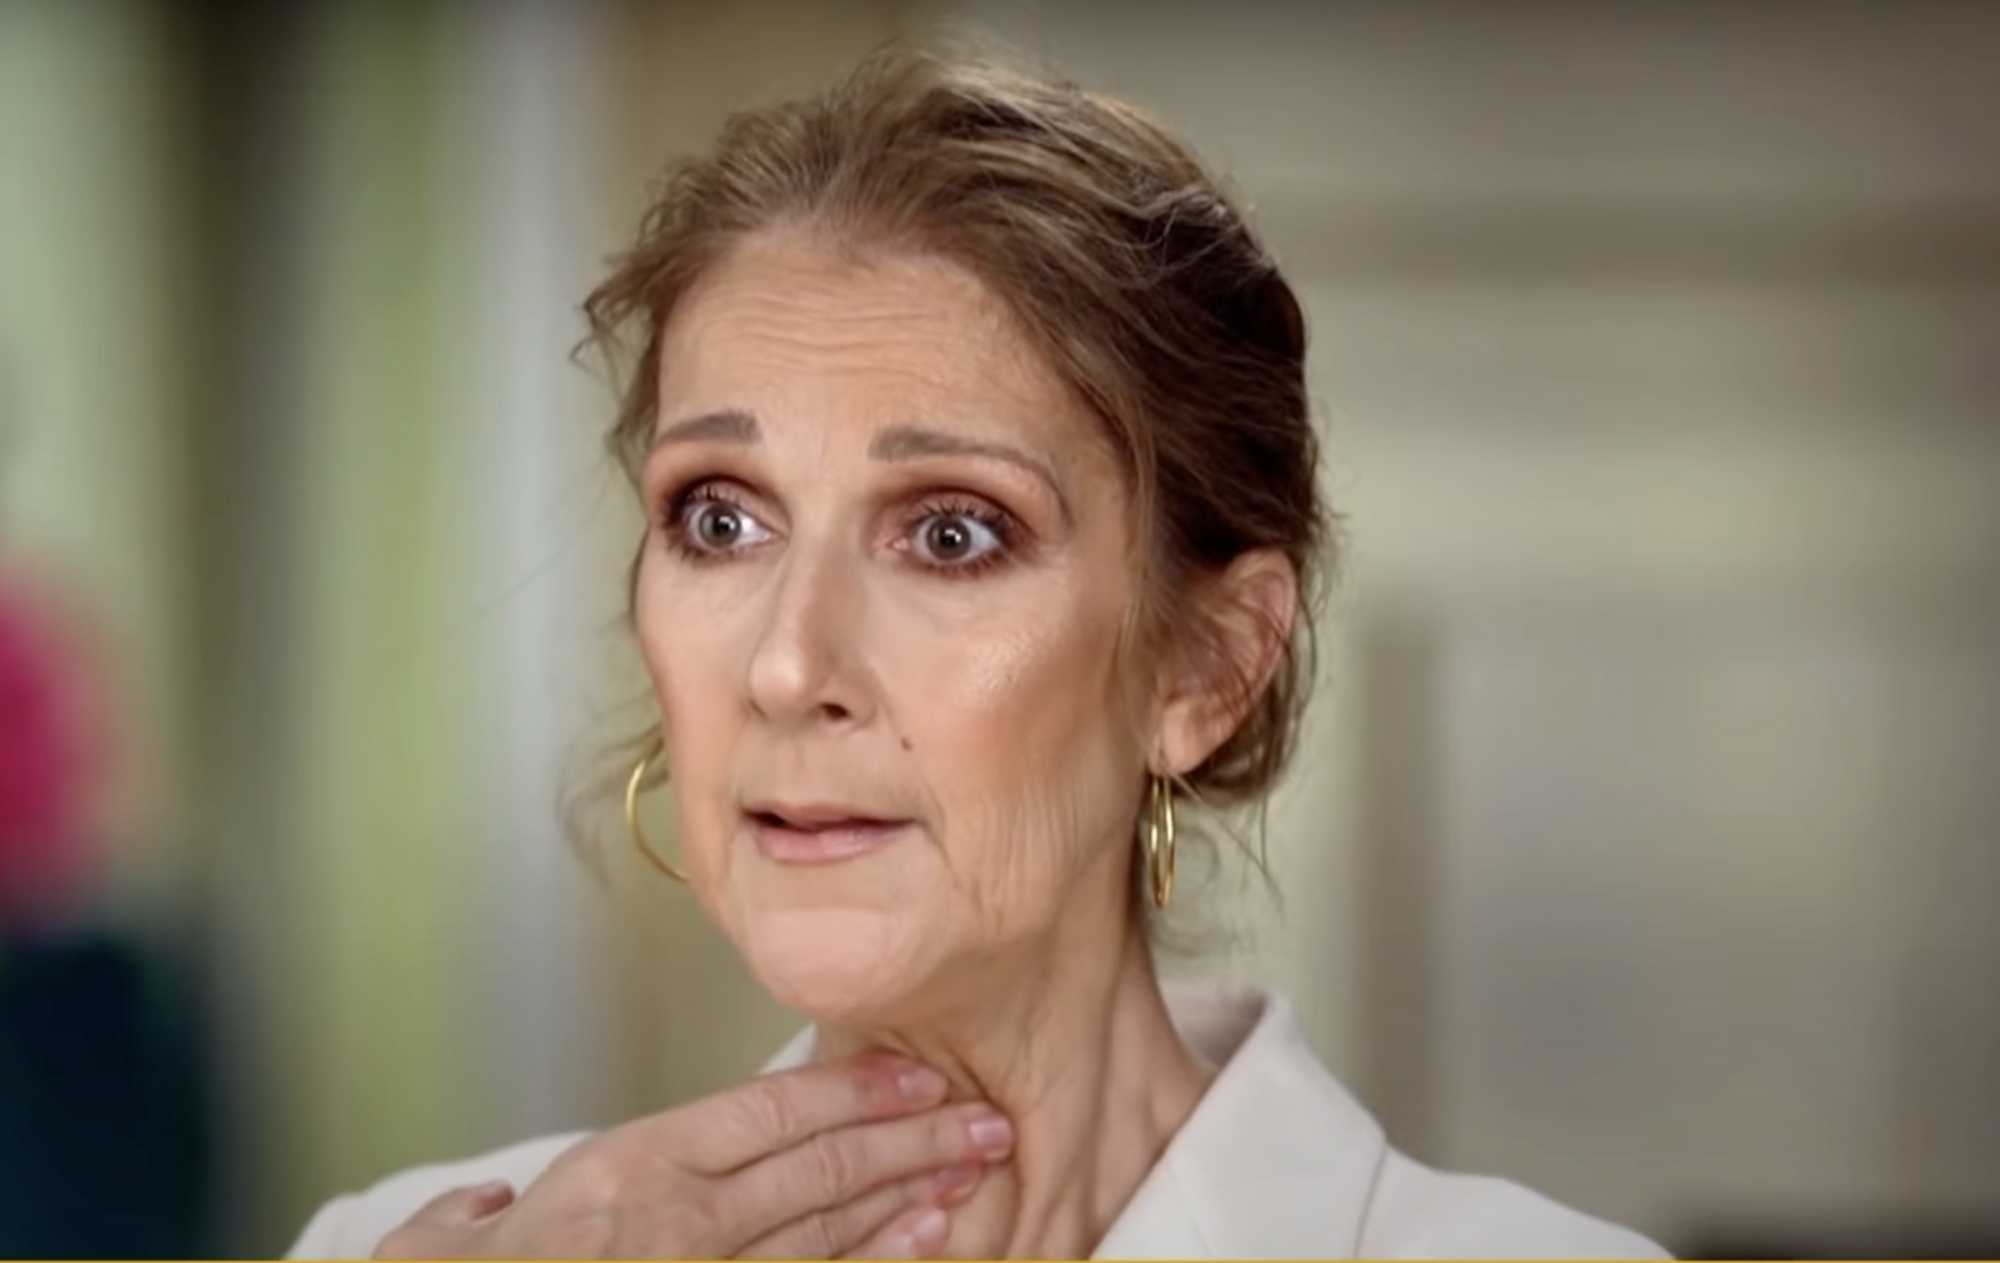 Incurably ill Celine Dion has changed beyond recognition: how the ''stiff person syndrome'' affected the singer